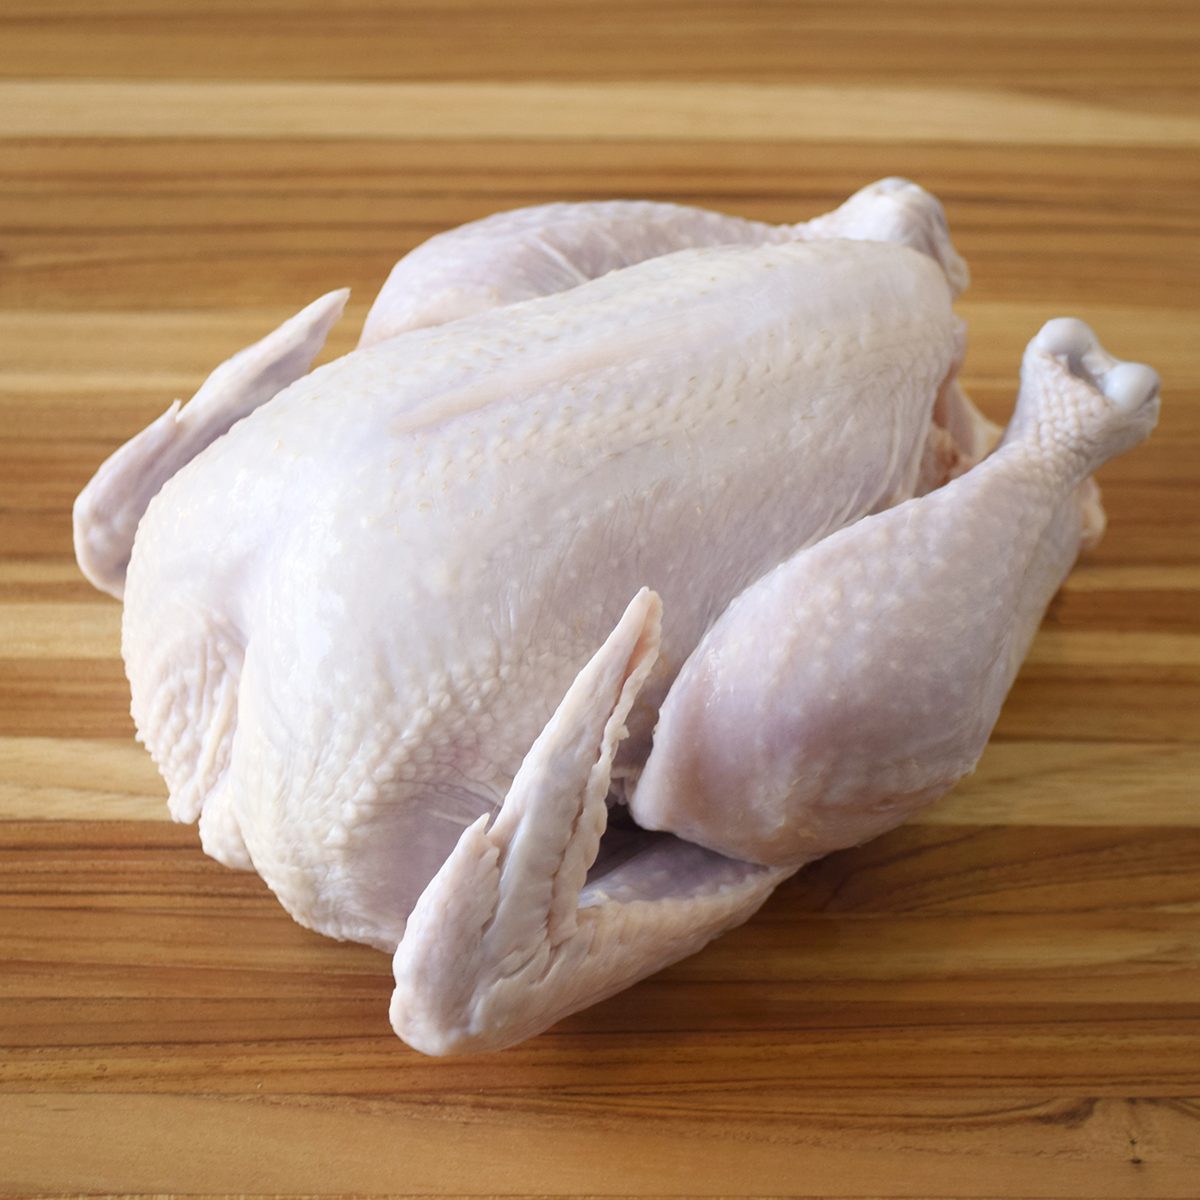 sale on organic meat and poultry